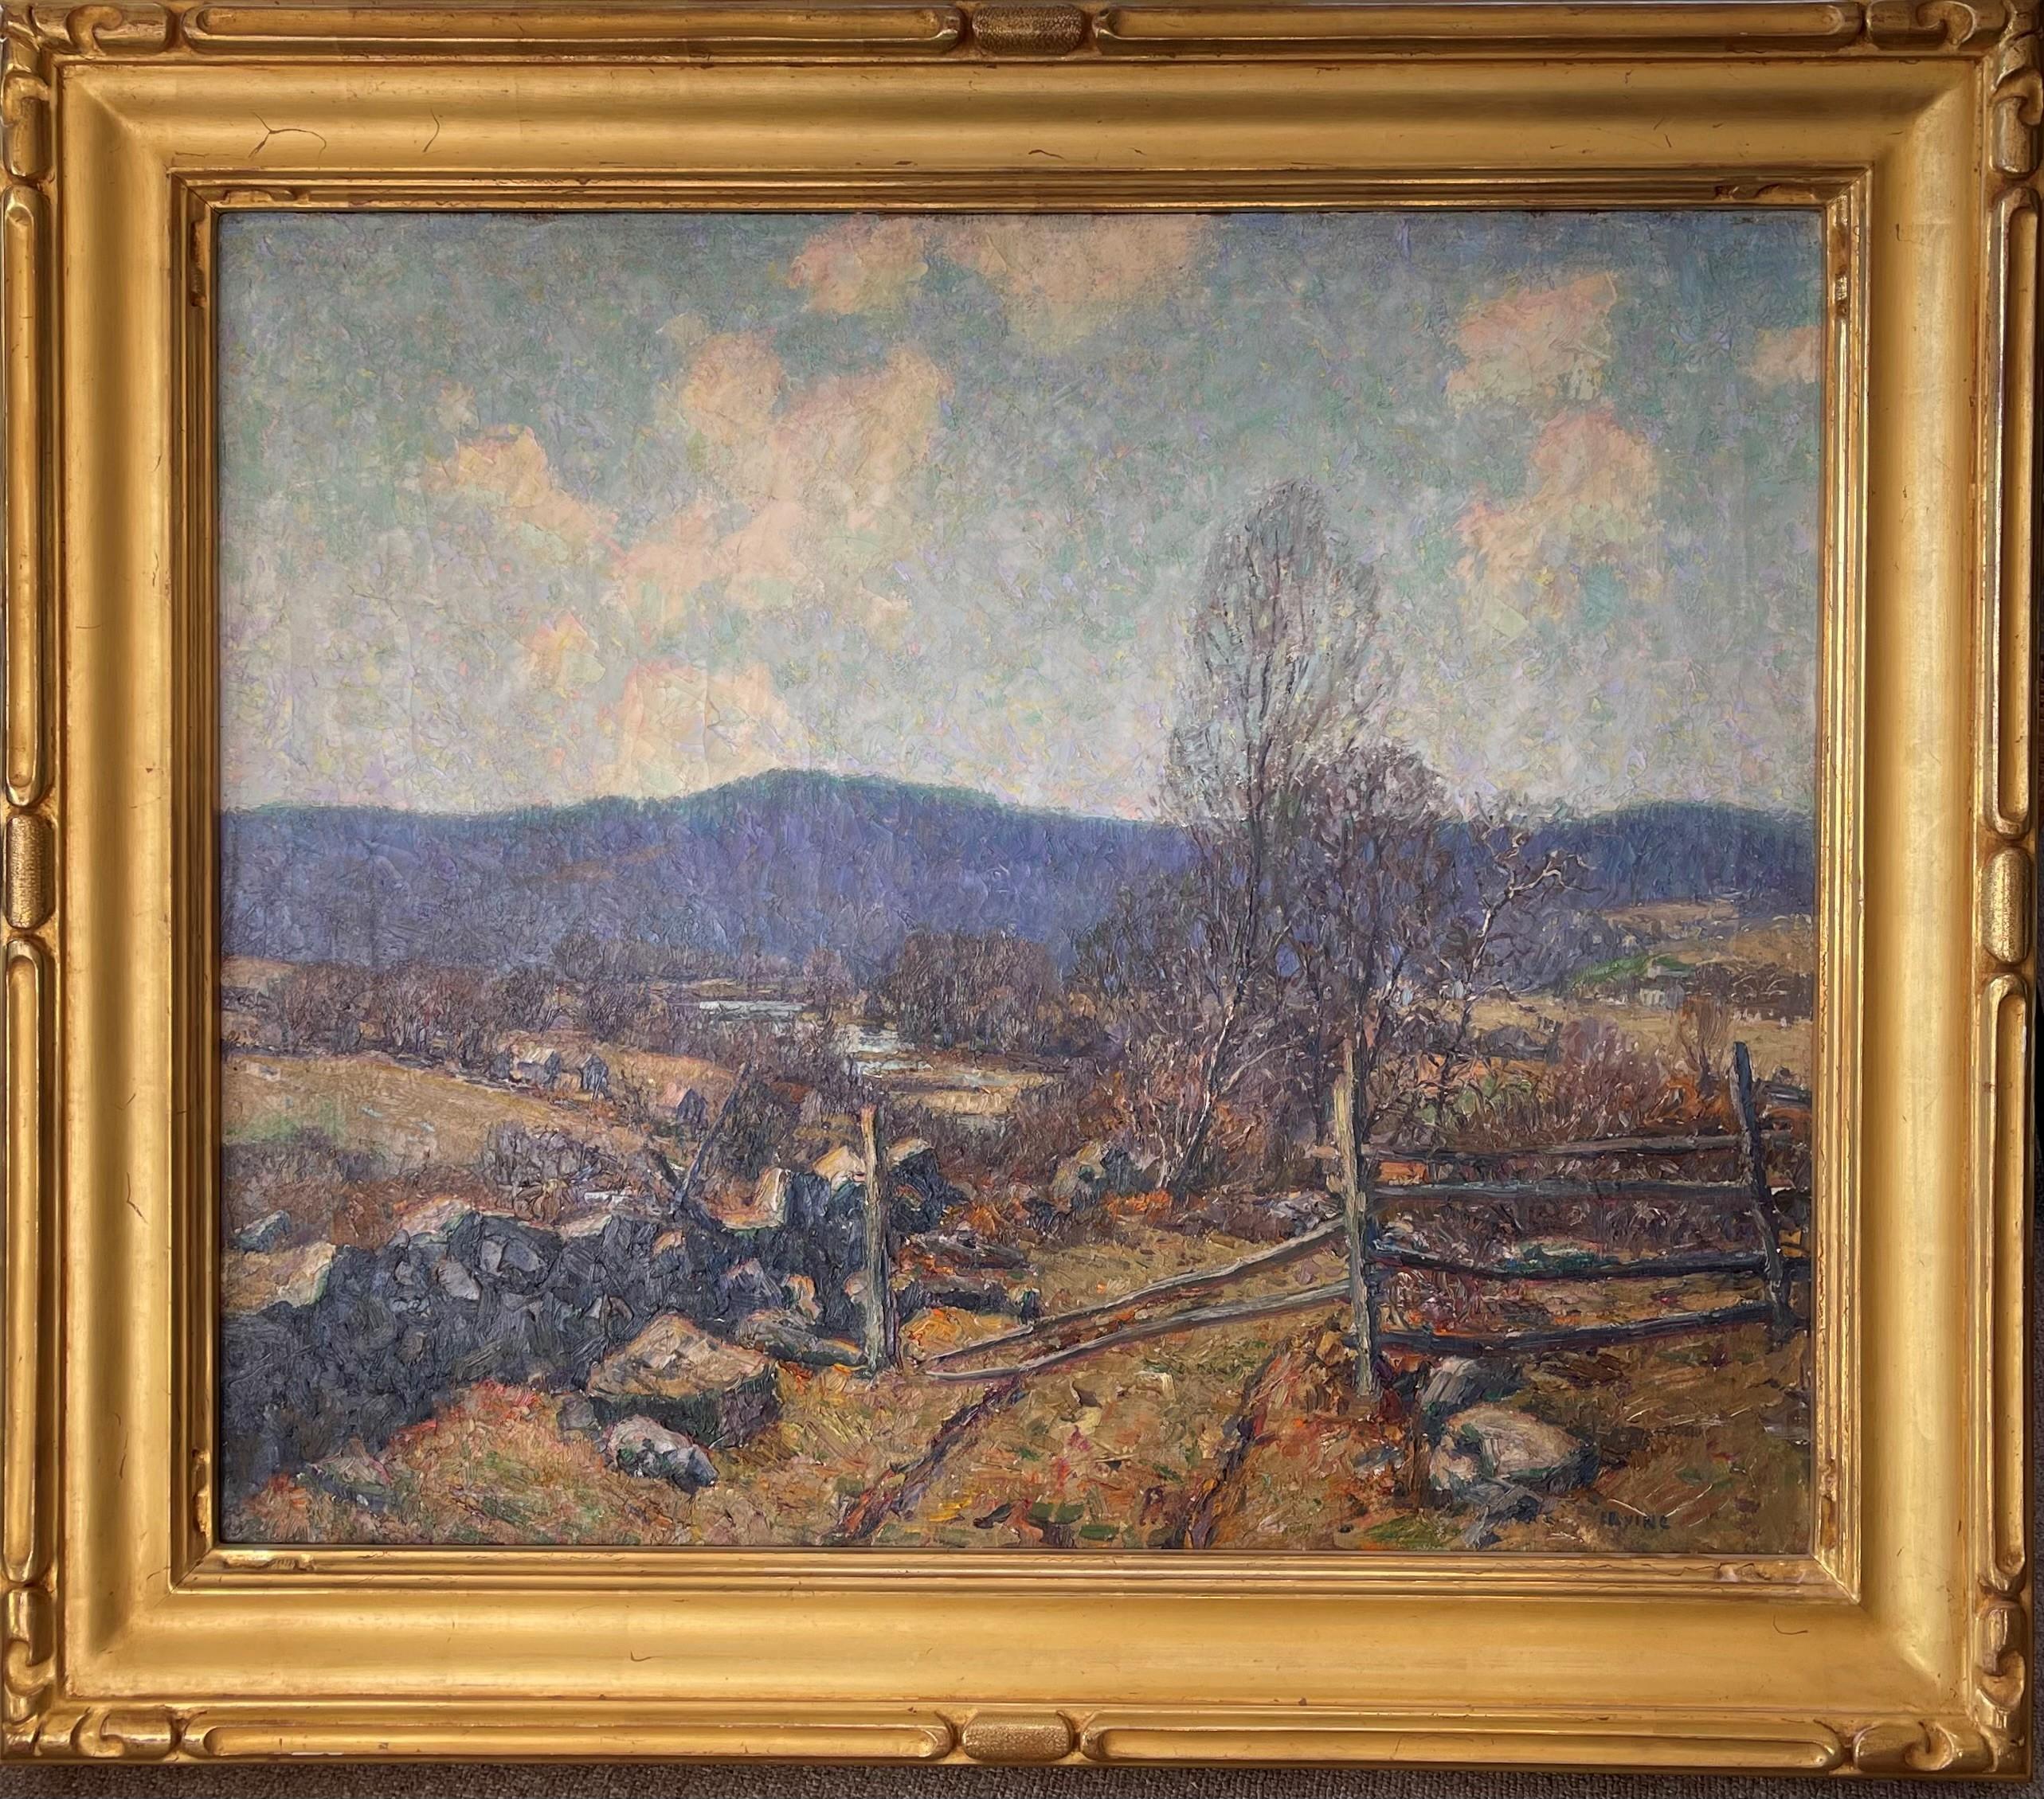 How do I find the artist of an oil painting?